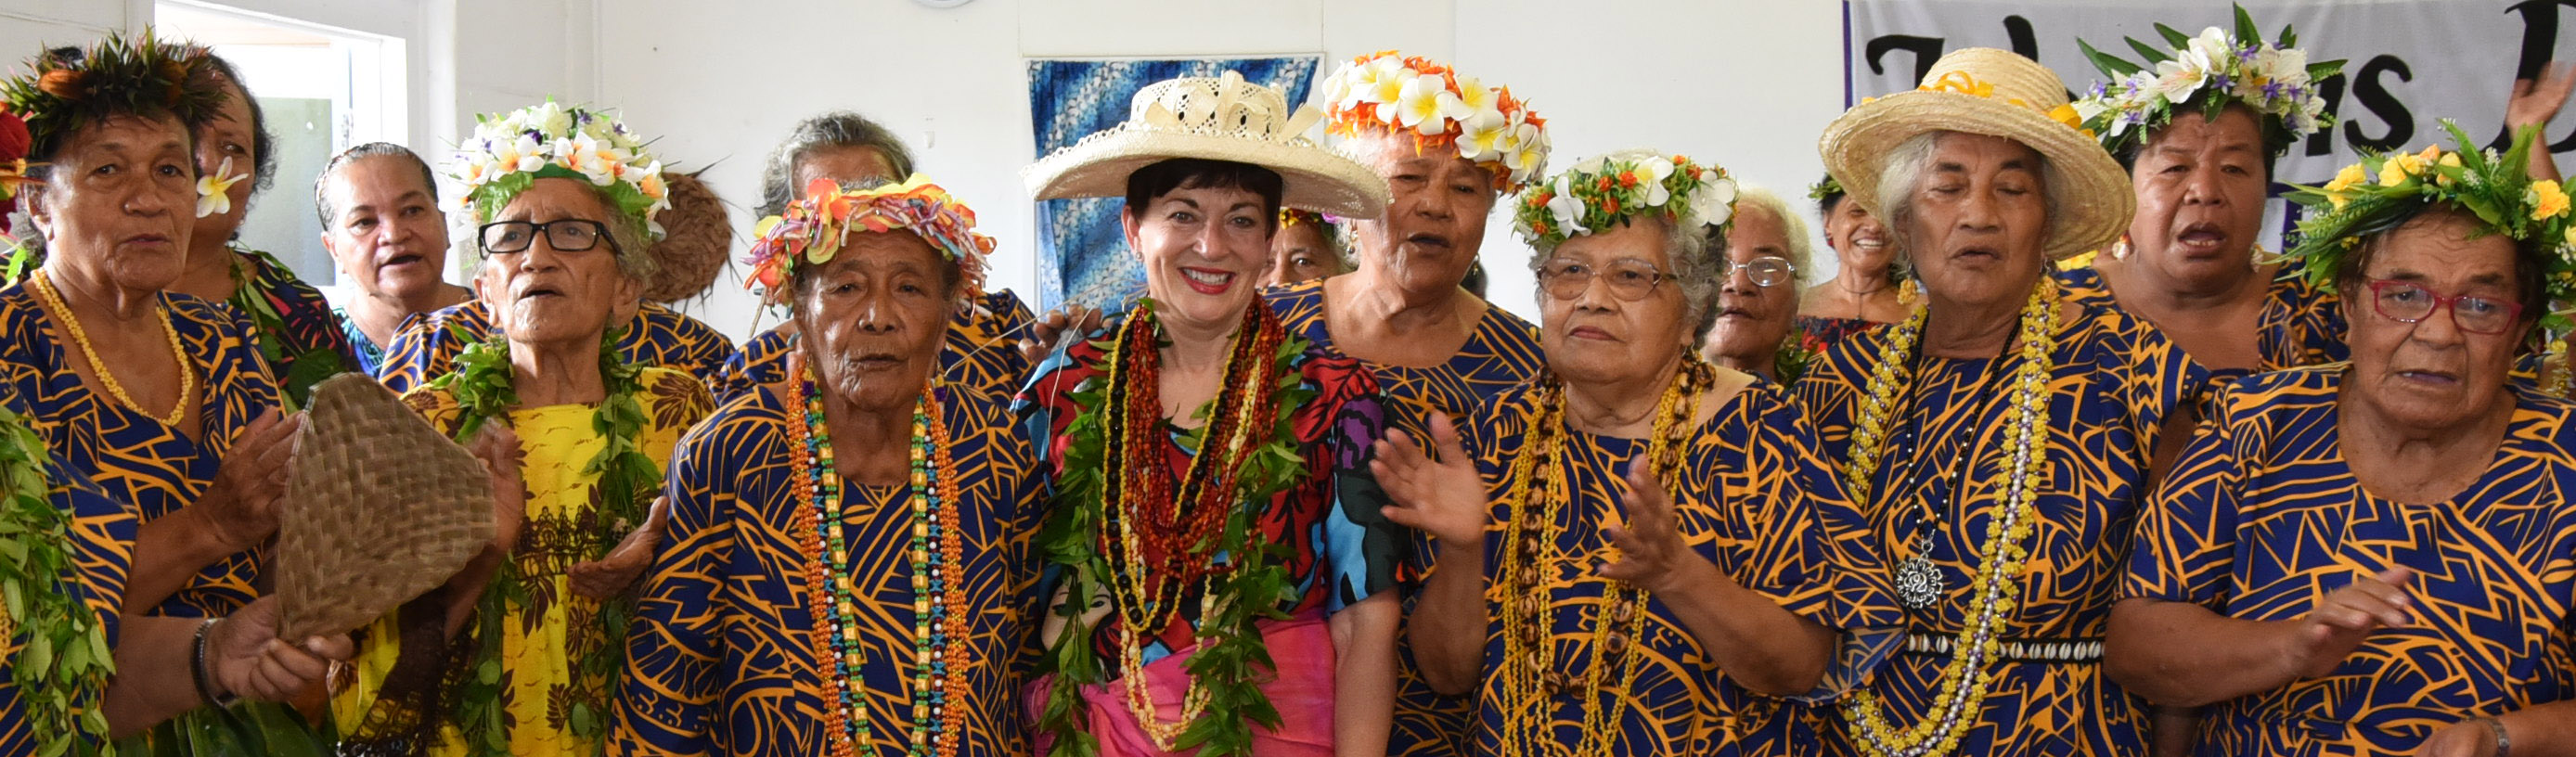 https://gg.govt.nz/images/governor-general-rt-hon-dame-patsy-reddy-and-members-national-council-women National Council of Women in Niue